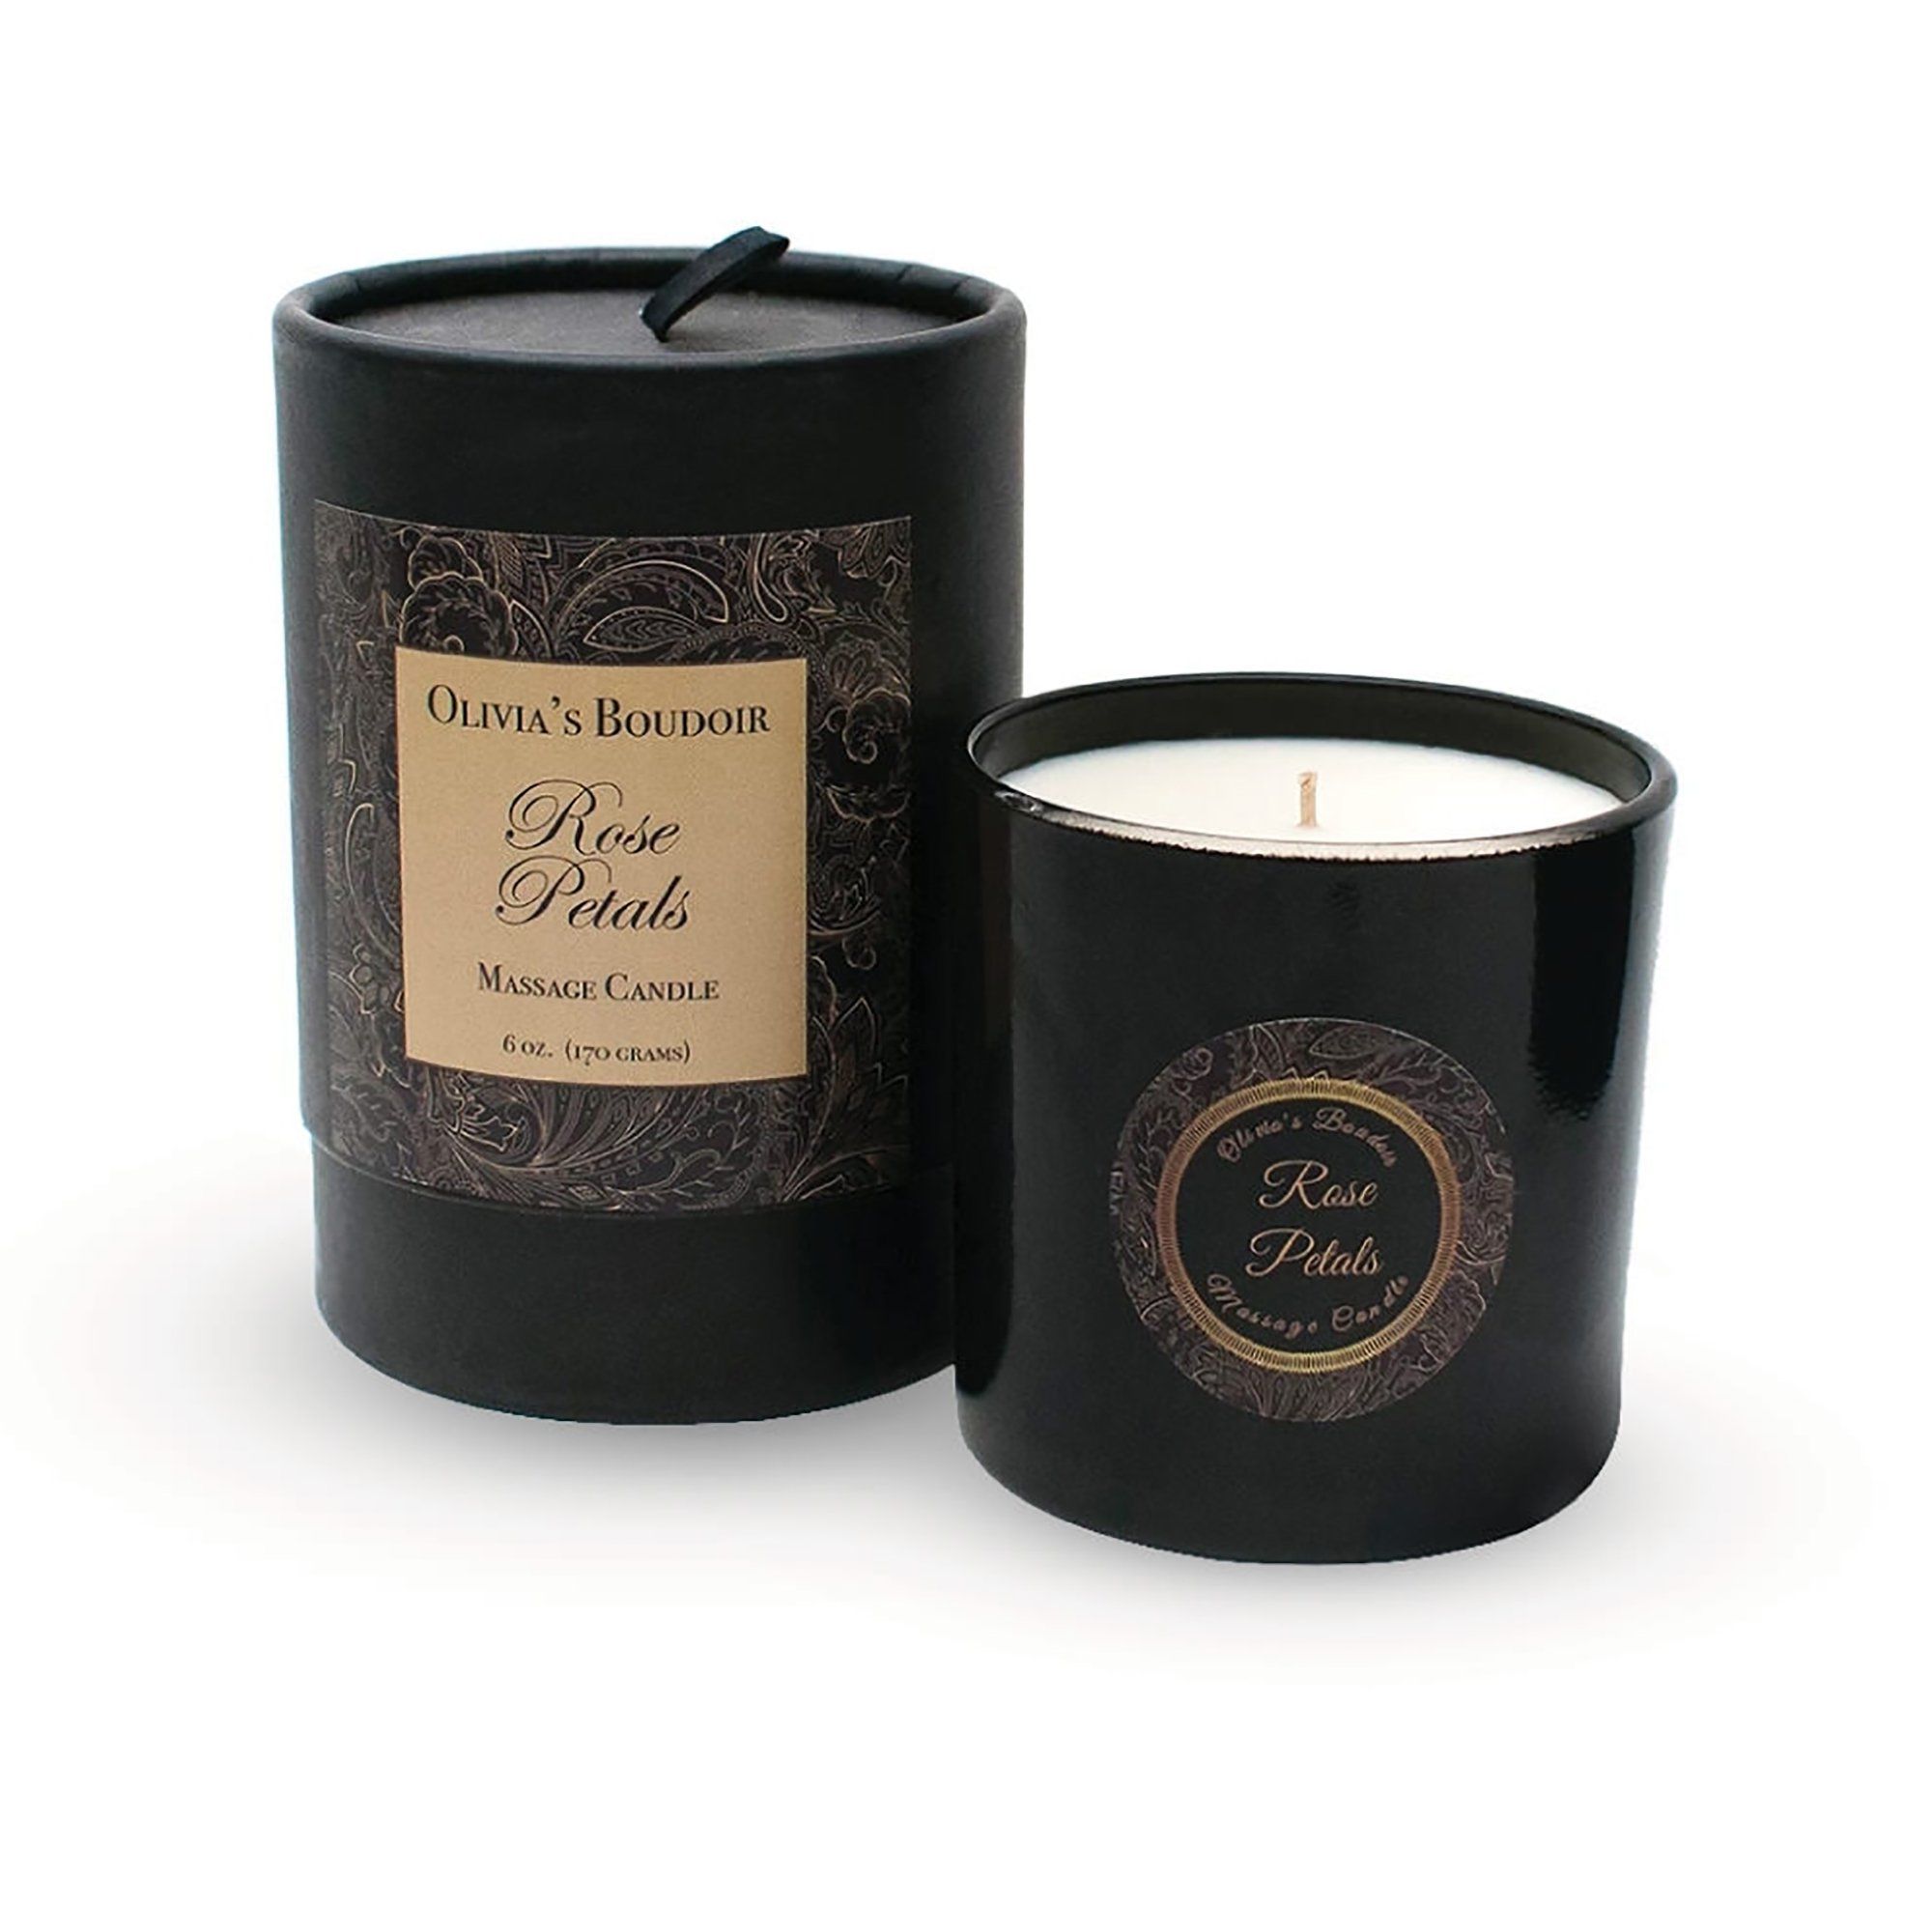 Olivia's Boudoir French Vanilla Massage Candle at The Cowgirl Shop